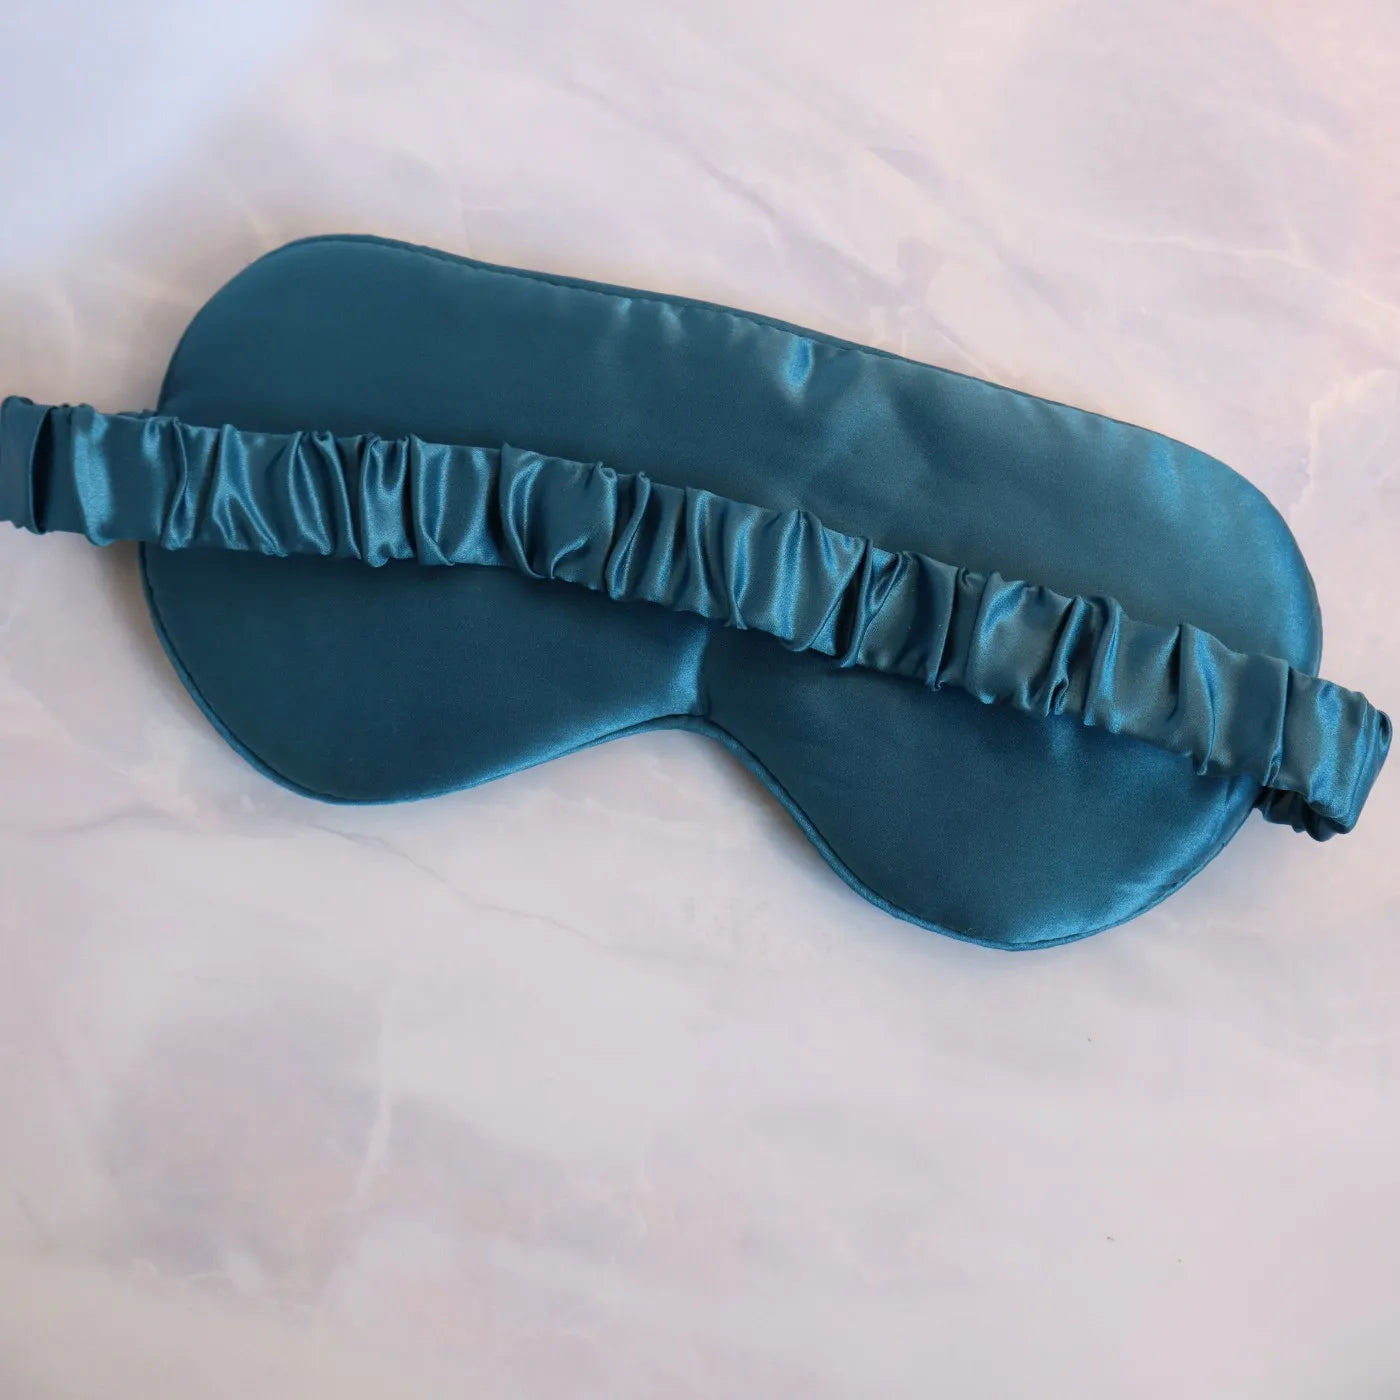 Luxury 22mm 100% Mulberry Silk Eye Mask in Teal Blue 22 mm Real Silk